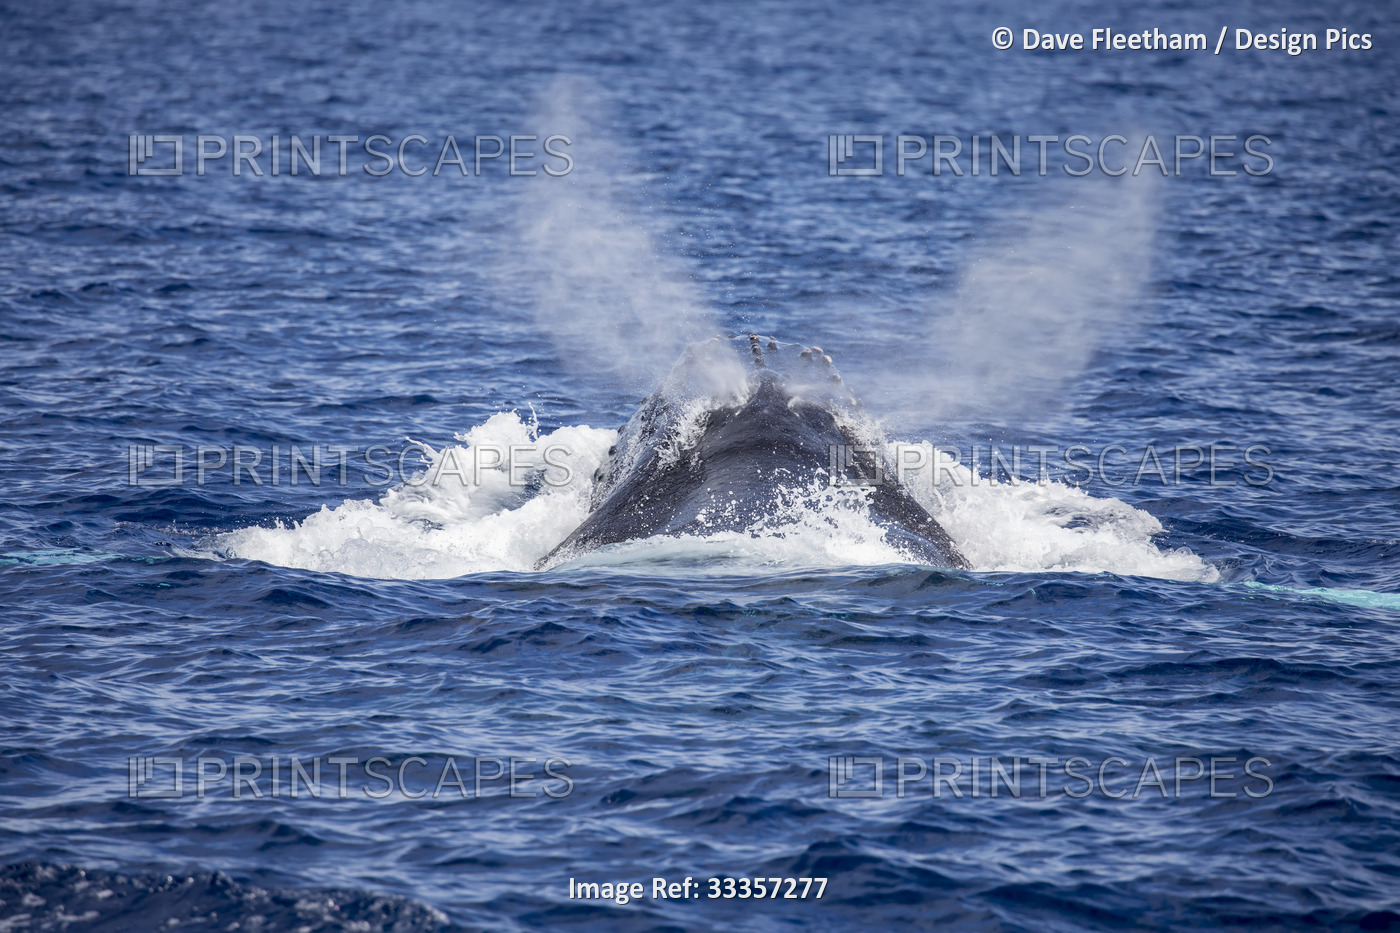 This image of a Humpback whale (Megaptera novaeangliae,) exhaling, shows the ...